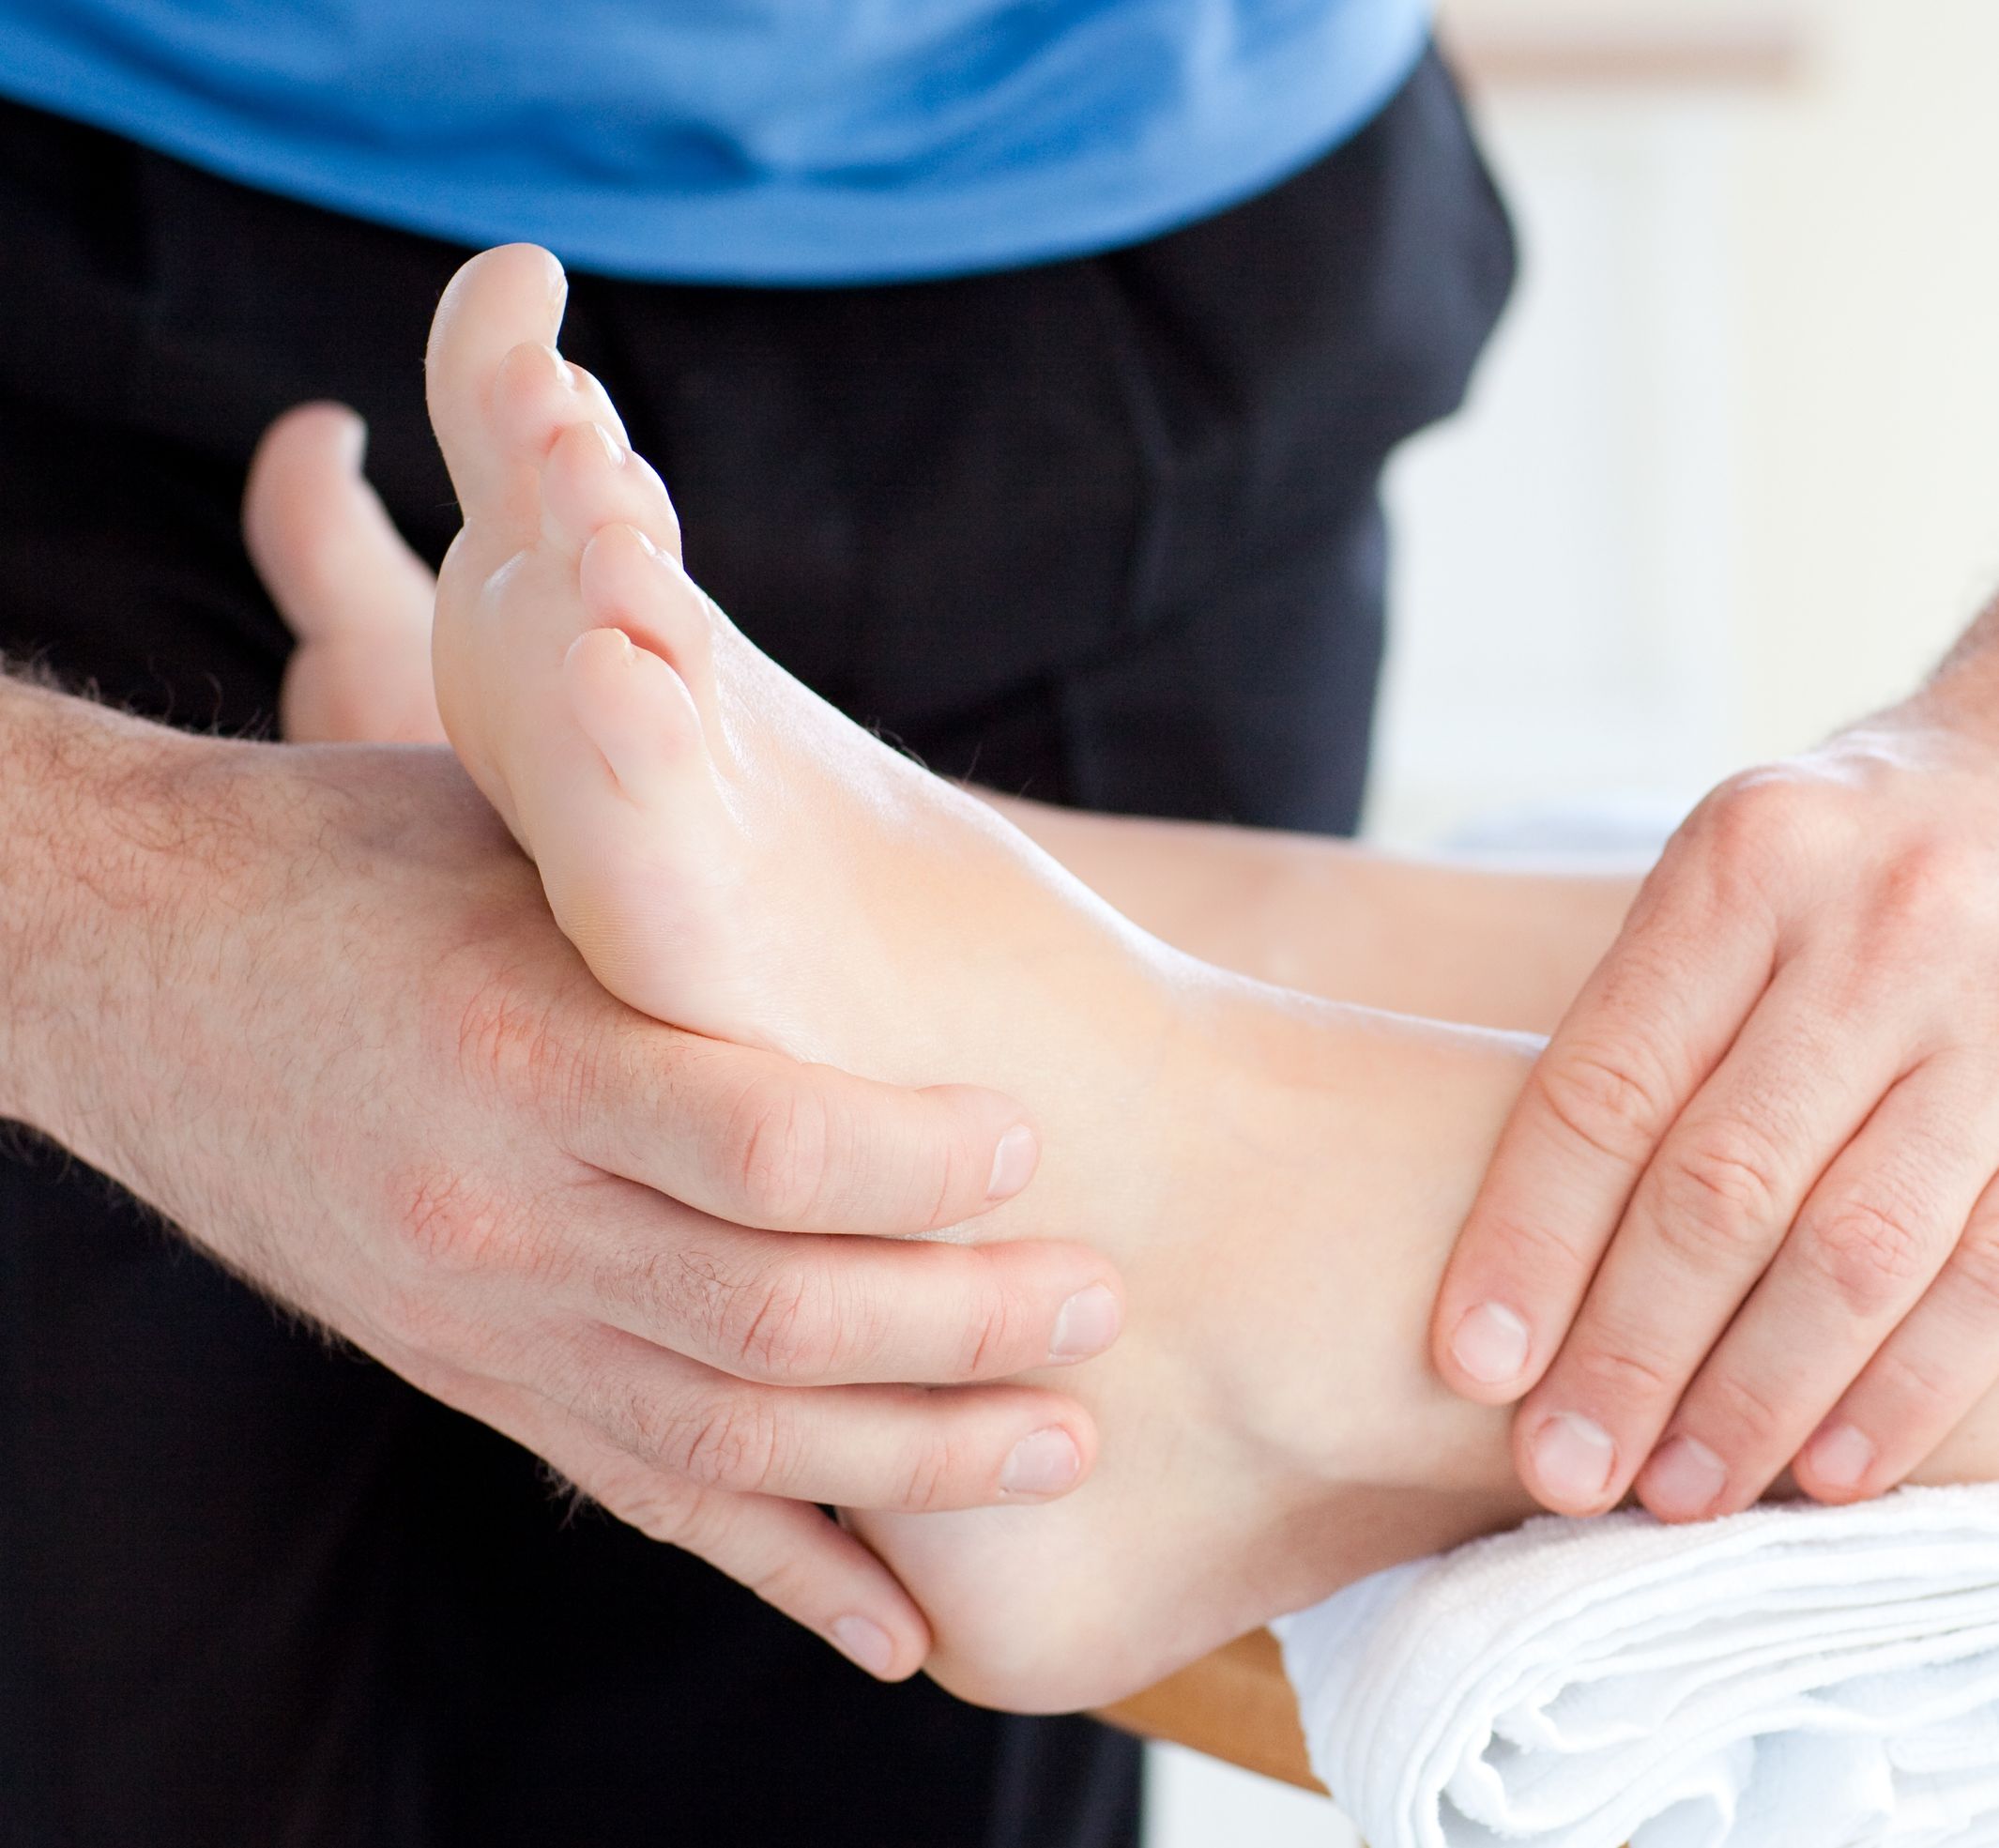 IF FOOT PAIN IS PREVENTING YOU FROM RUNNING, PODIATRISTS CAN HELP